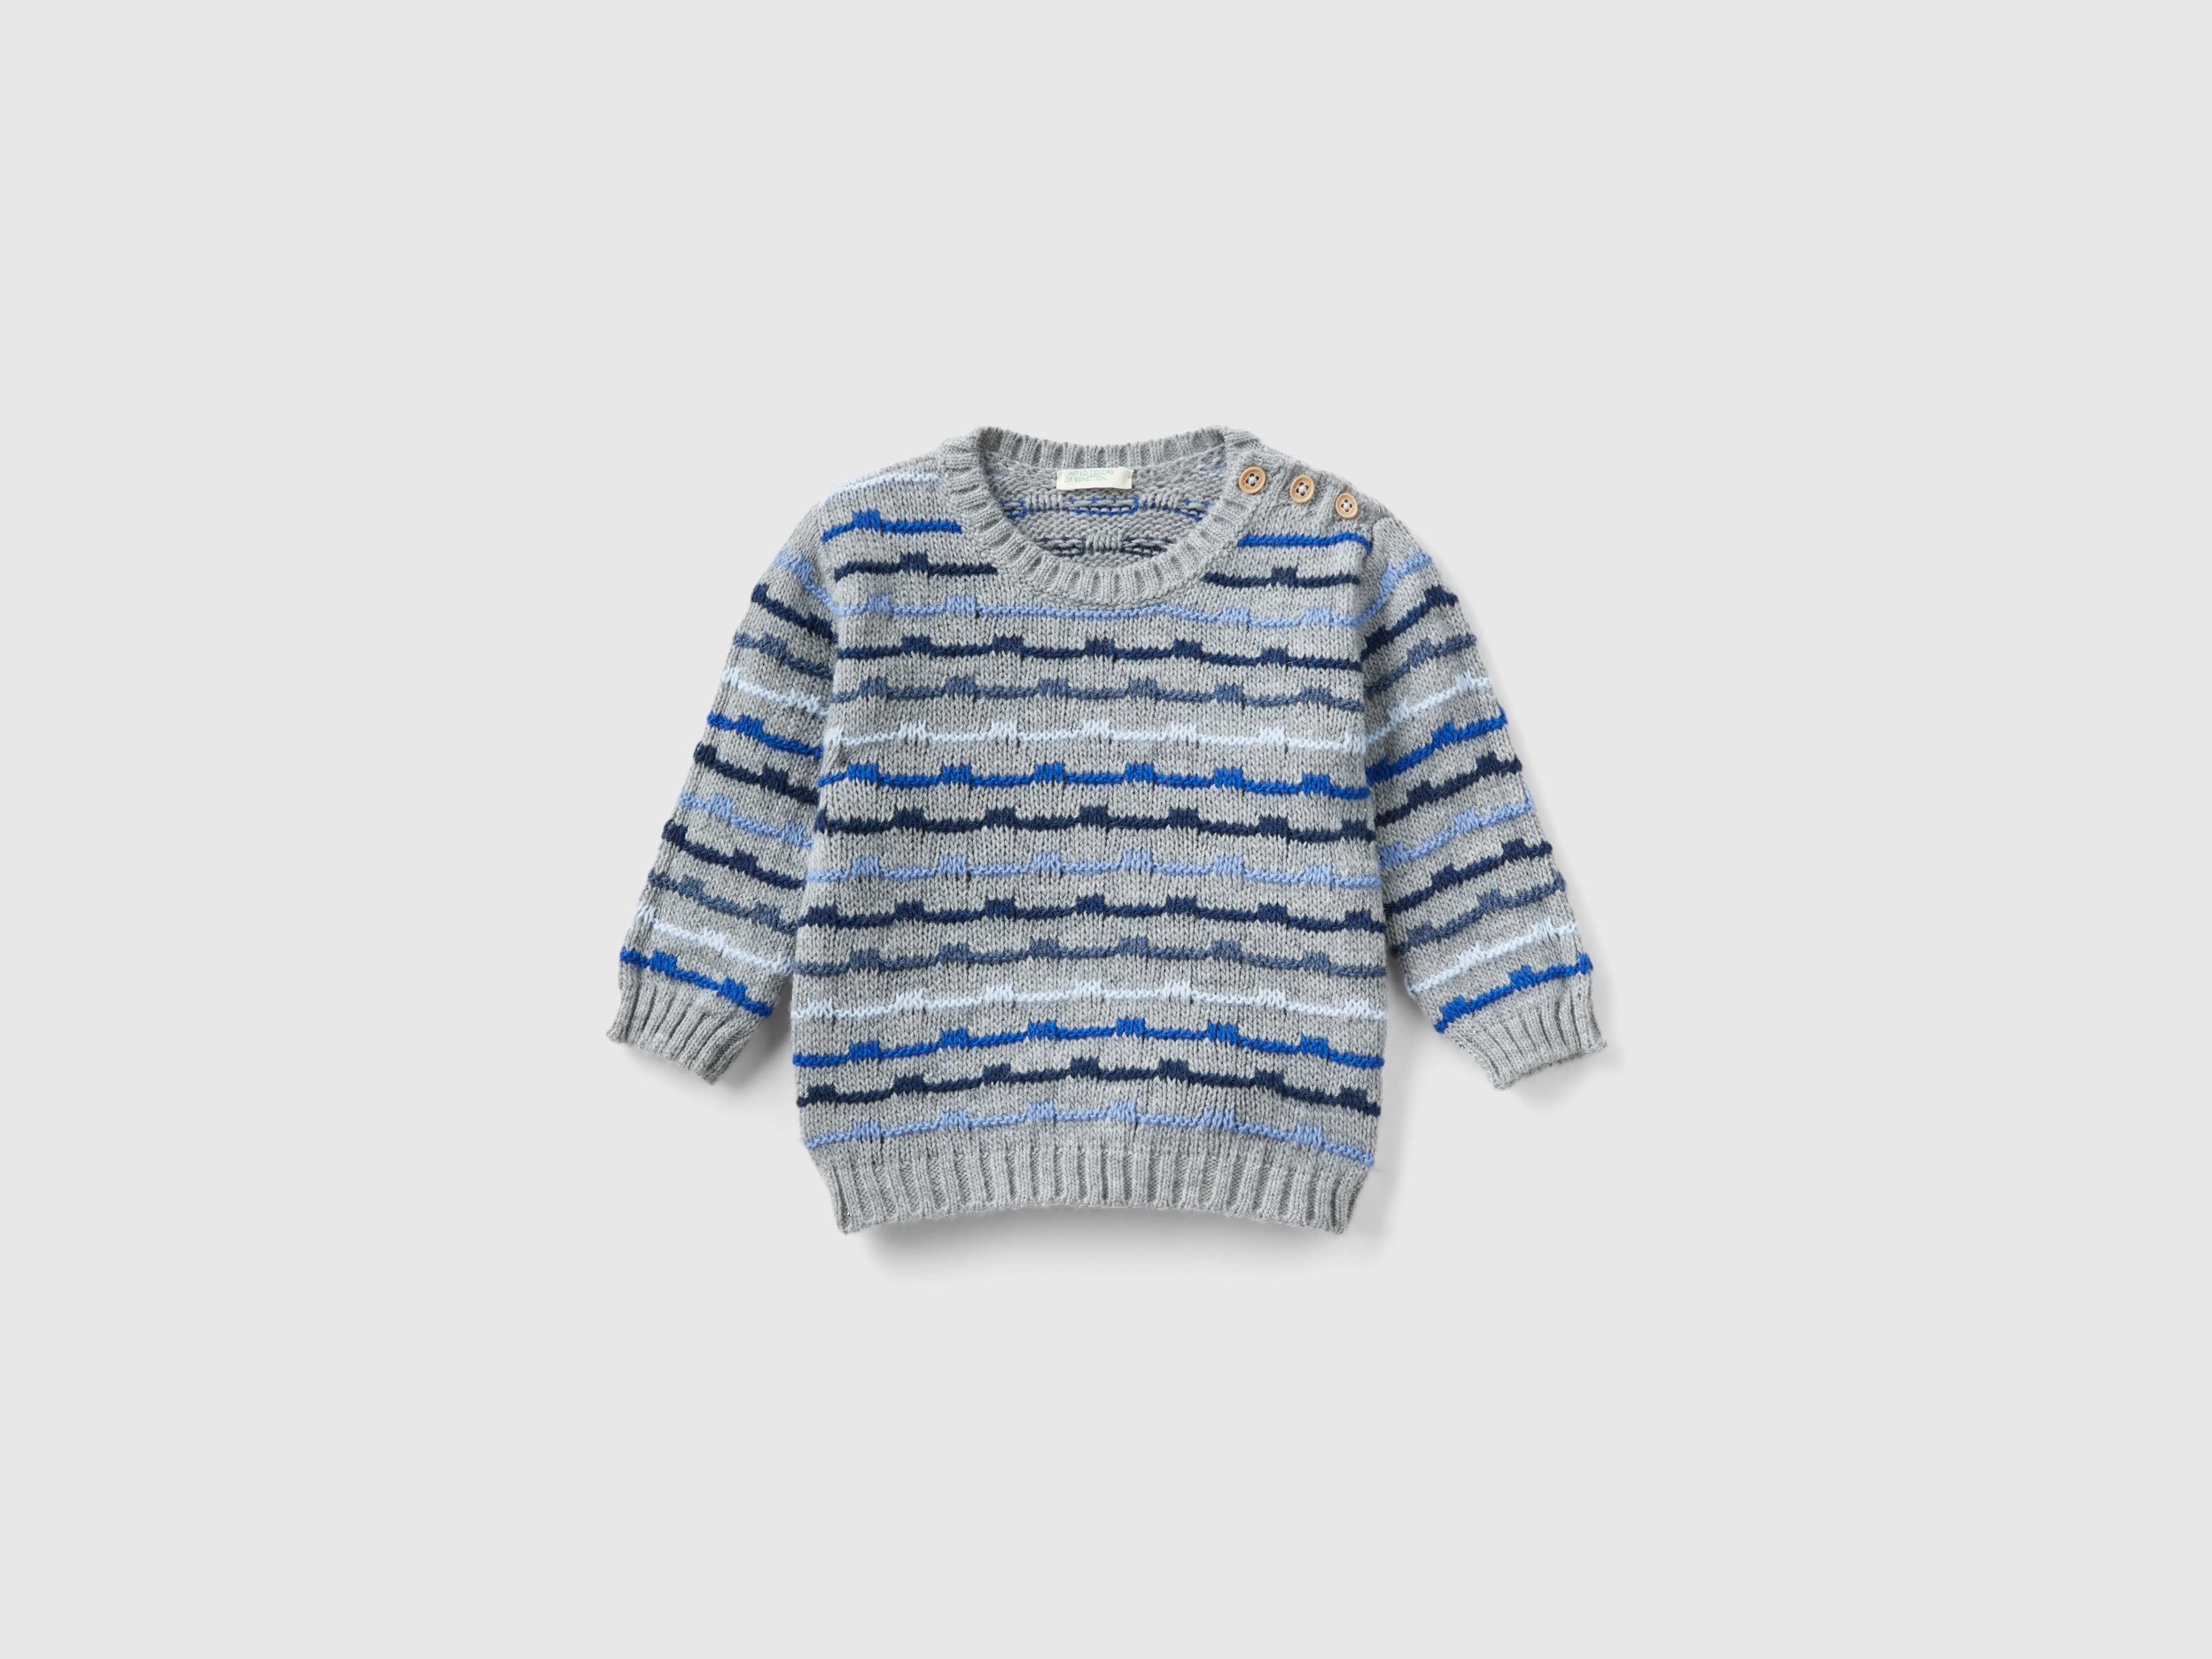 Benetton, Sweater In Wool Blend With Inlay, size 3-6, Multi-color, Kids